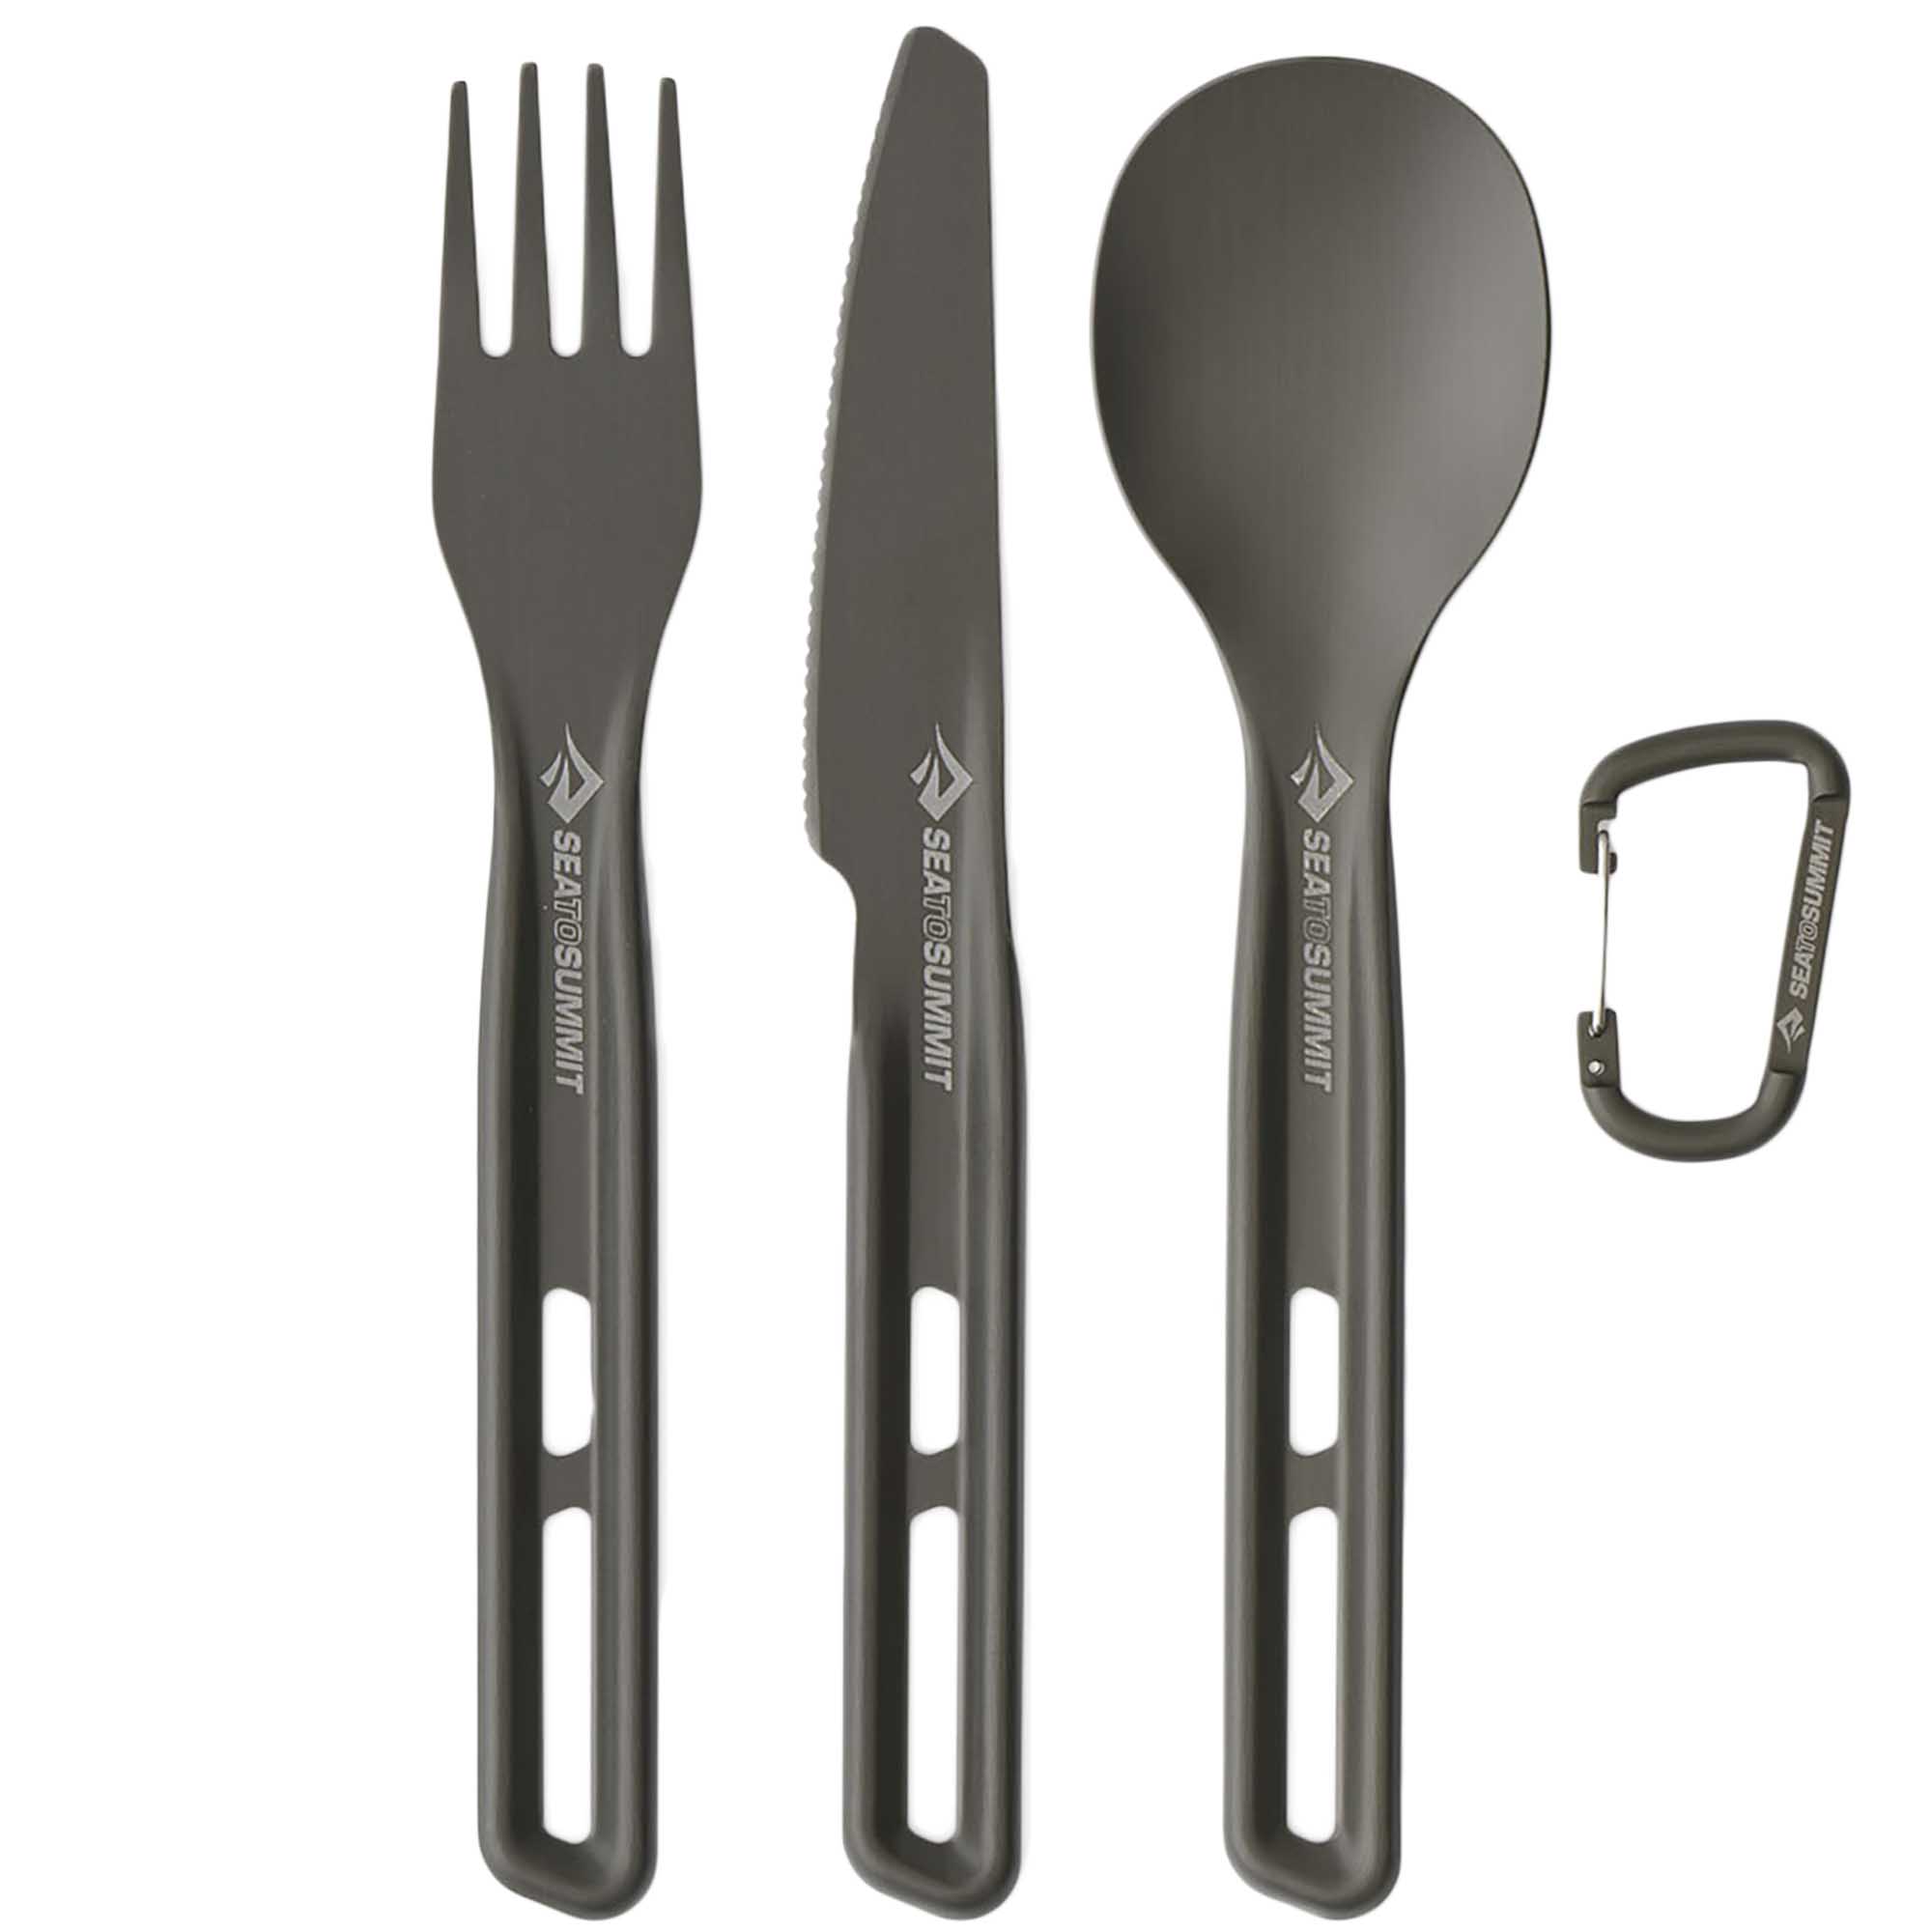 Sea to Summit Frontier 3pc Ultralight Camping Cutlery